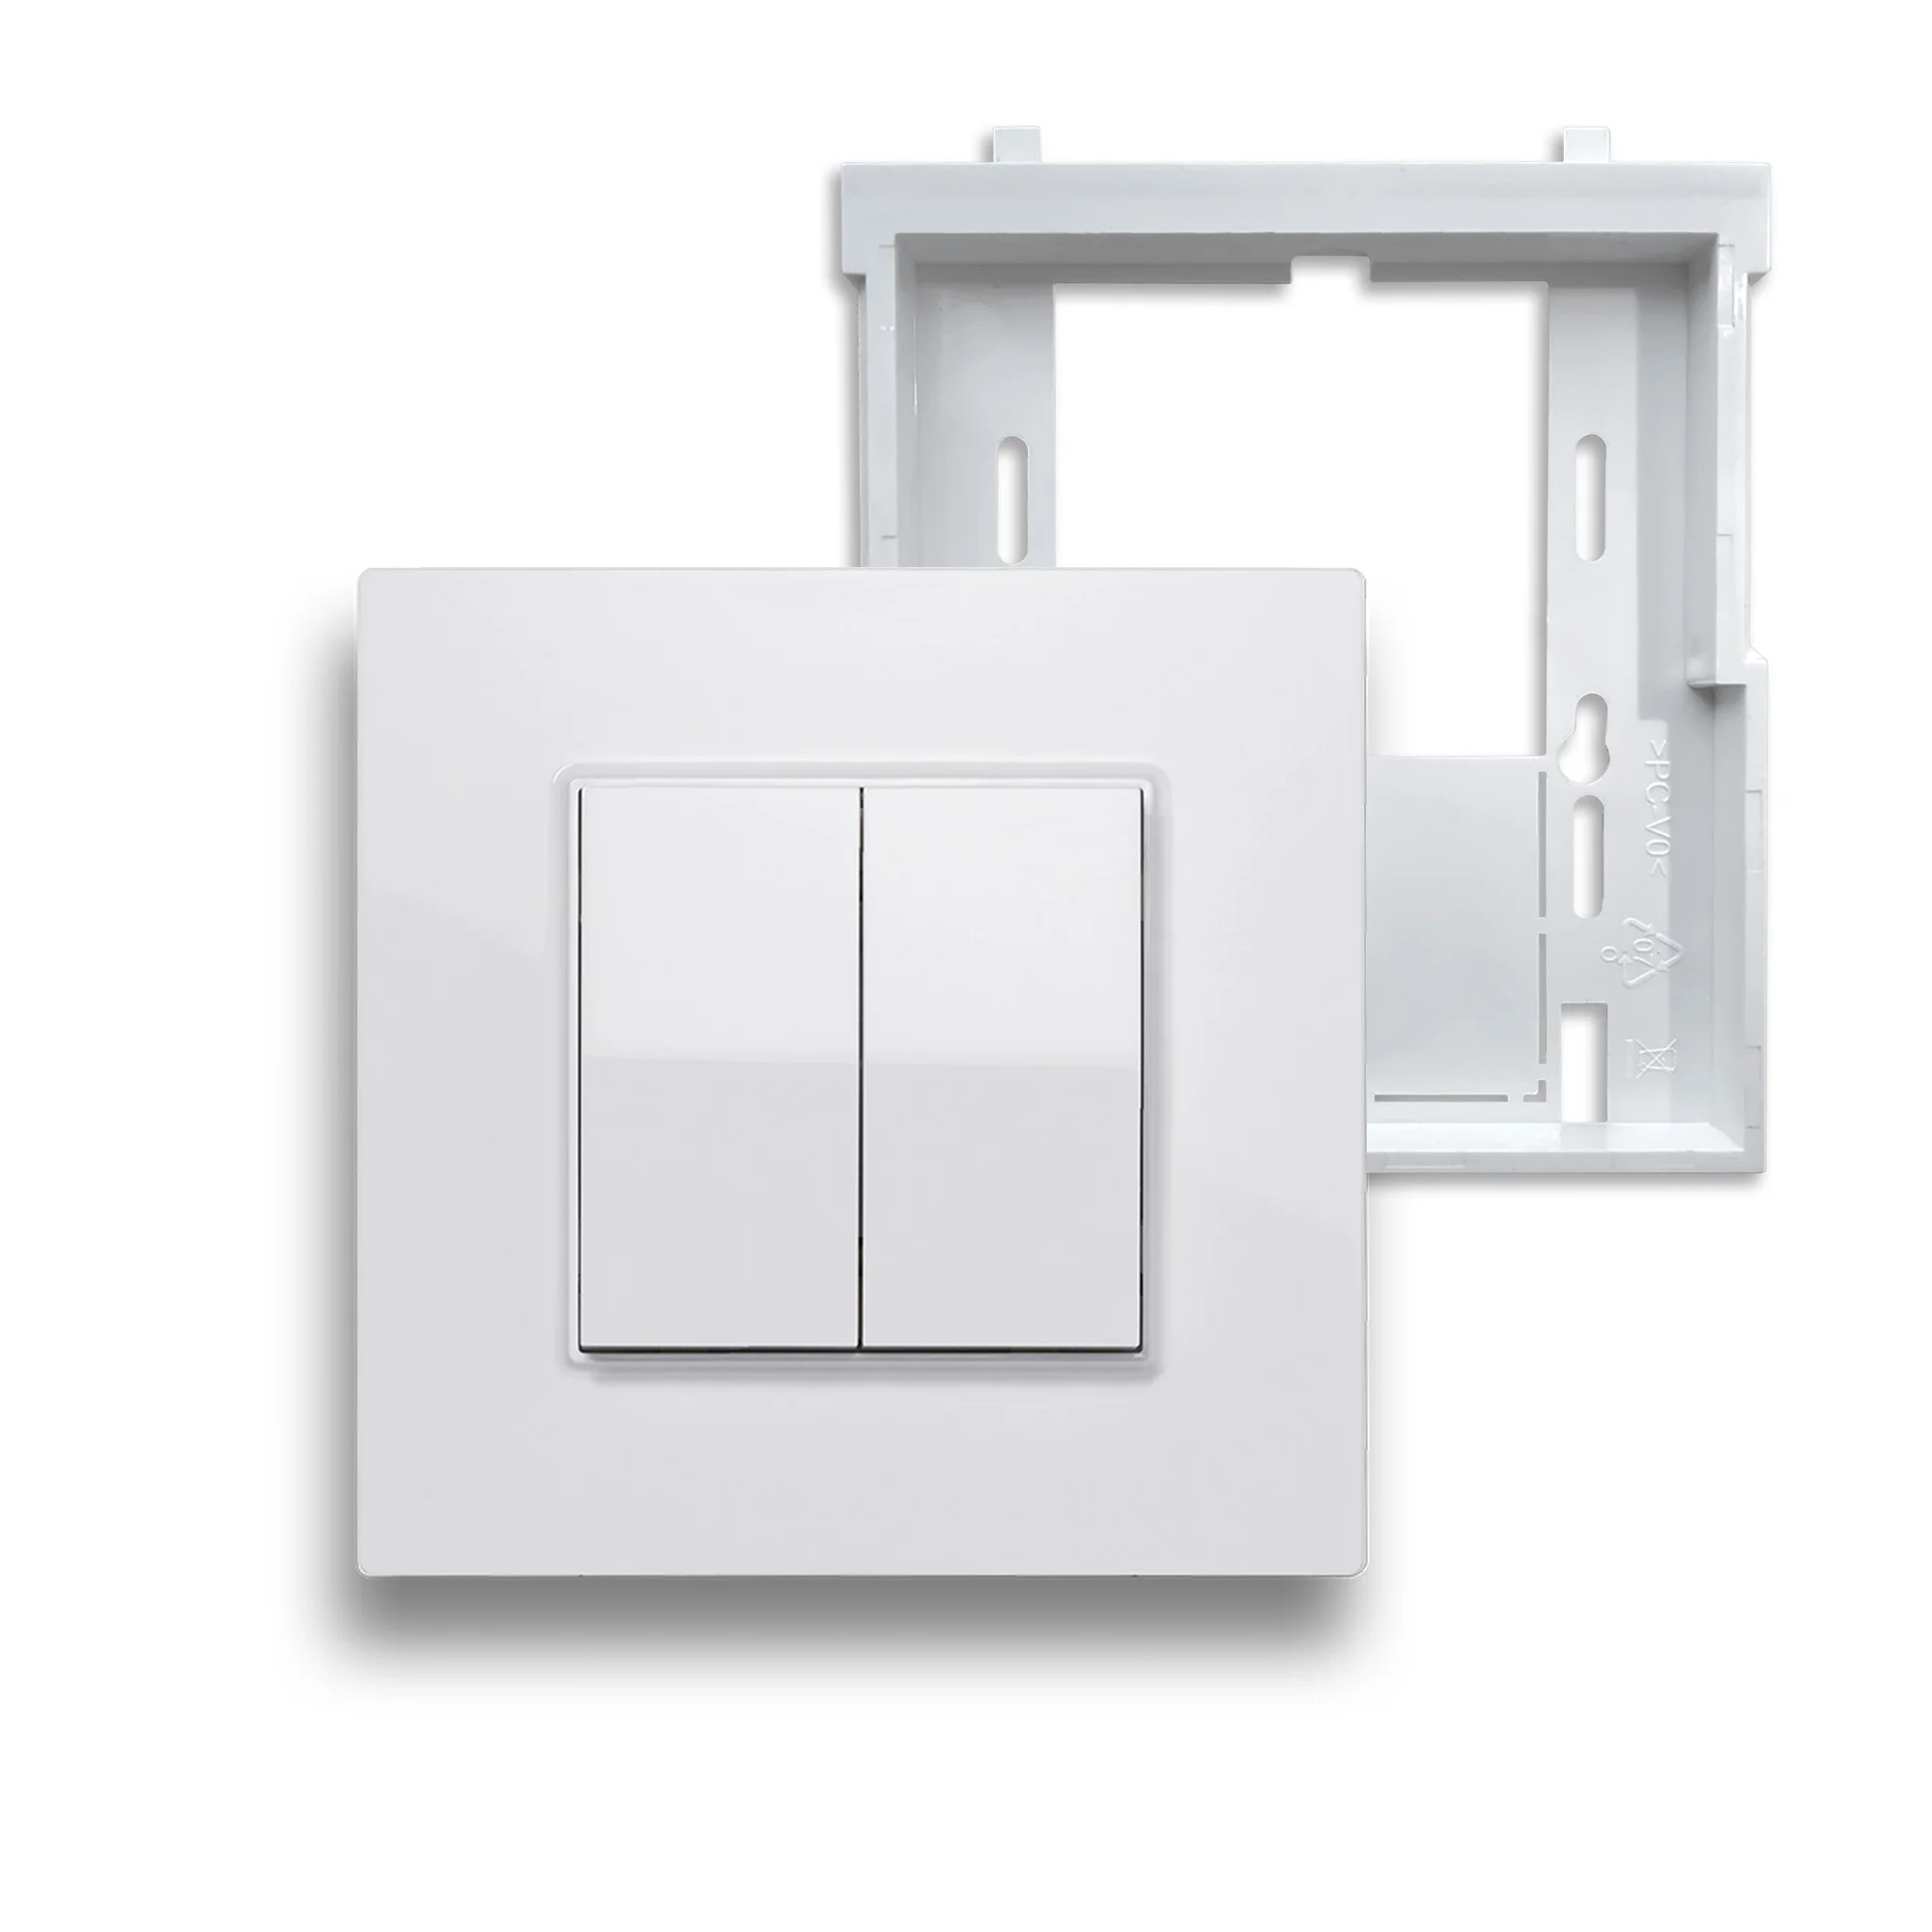 Friends of Hue Switch with connecting frame, to supplement Hidden Socket | Versteckdose®